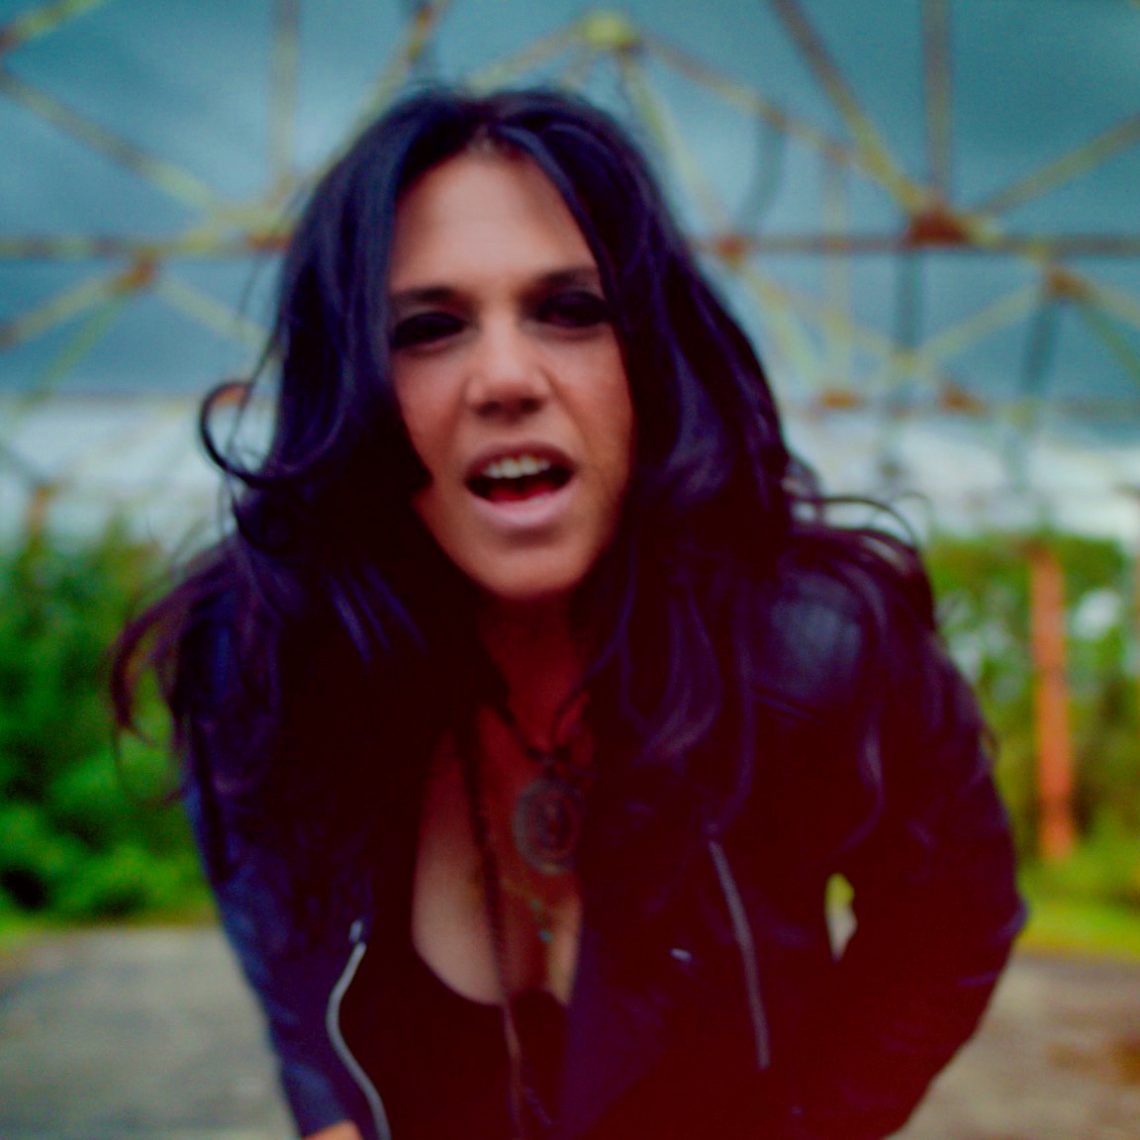 Sari Schorr Releases a New Video for ‘The New Revolution’